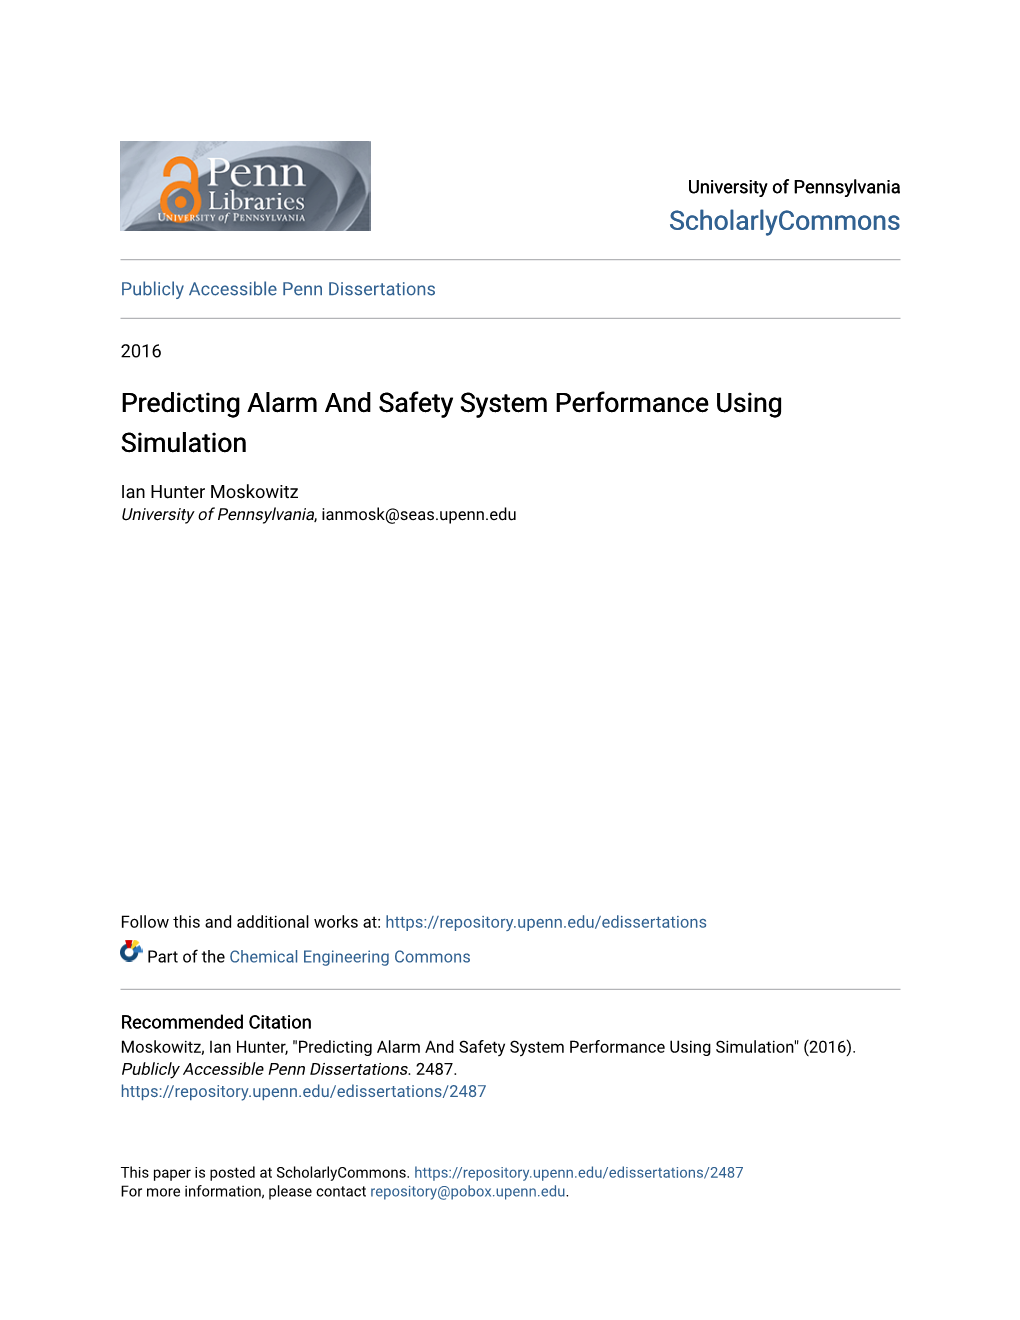 Predicting Alarm and Safety System Performance Using Simulation